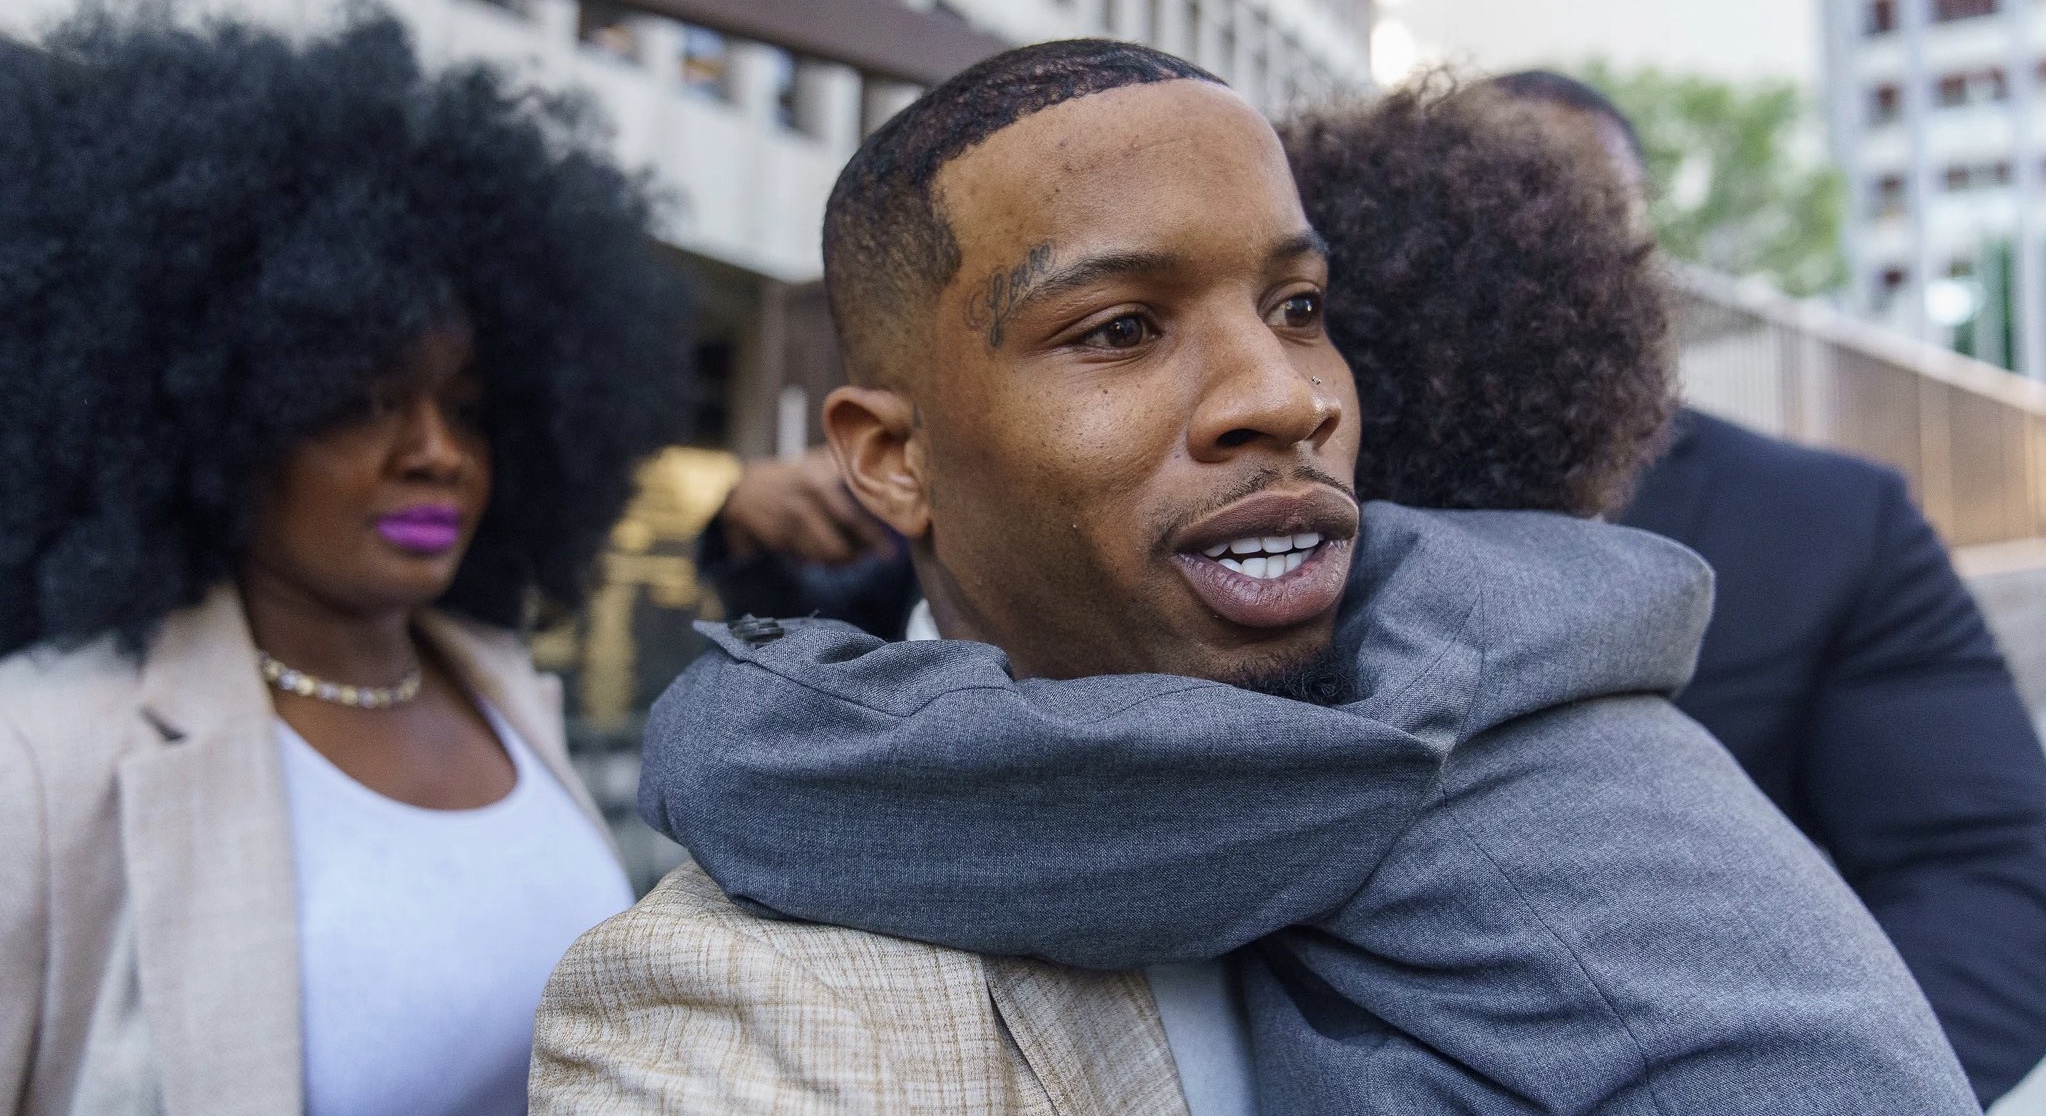 Tory Lanez Found Guilty Of All 3 Charges In The 2020 Shooting Of Megan Thee Stallion